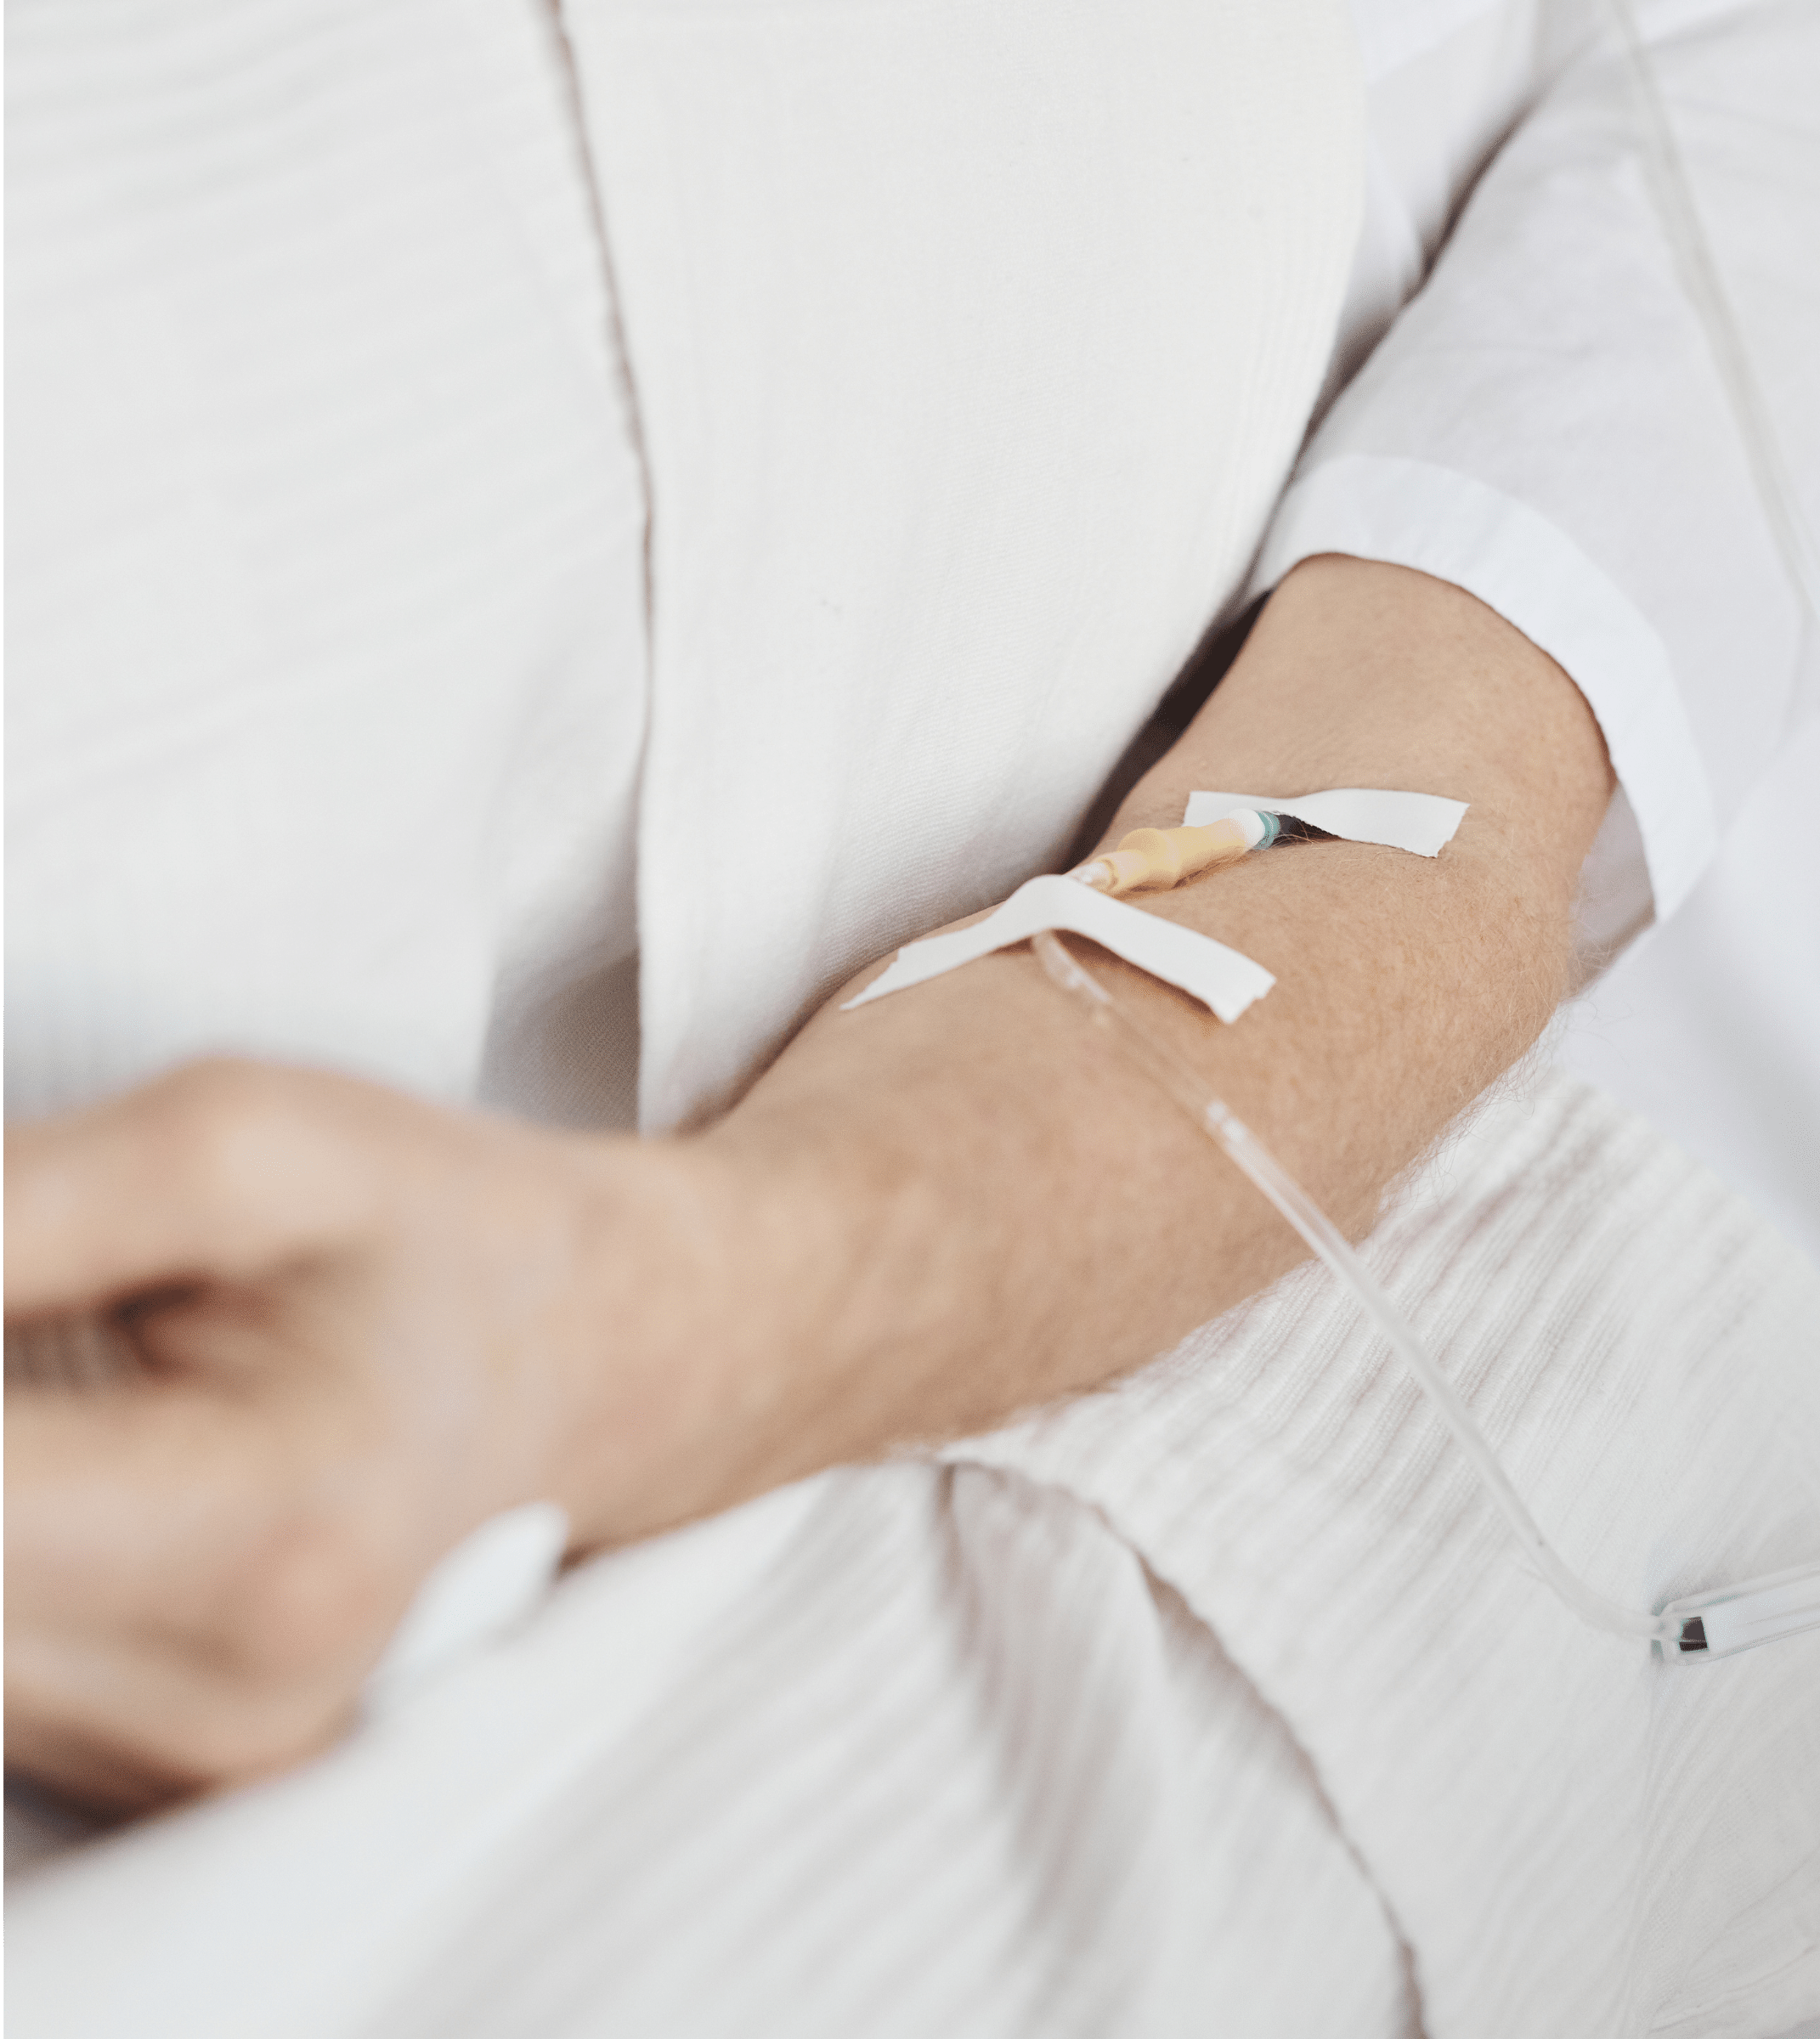 Infusion advocacy – Peripheral intravenous catheter in patient's arm